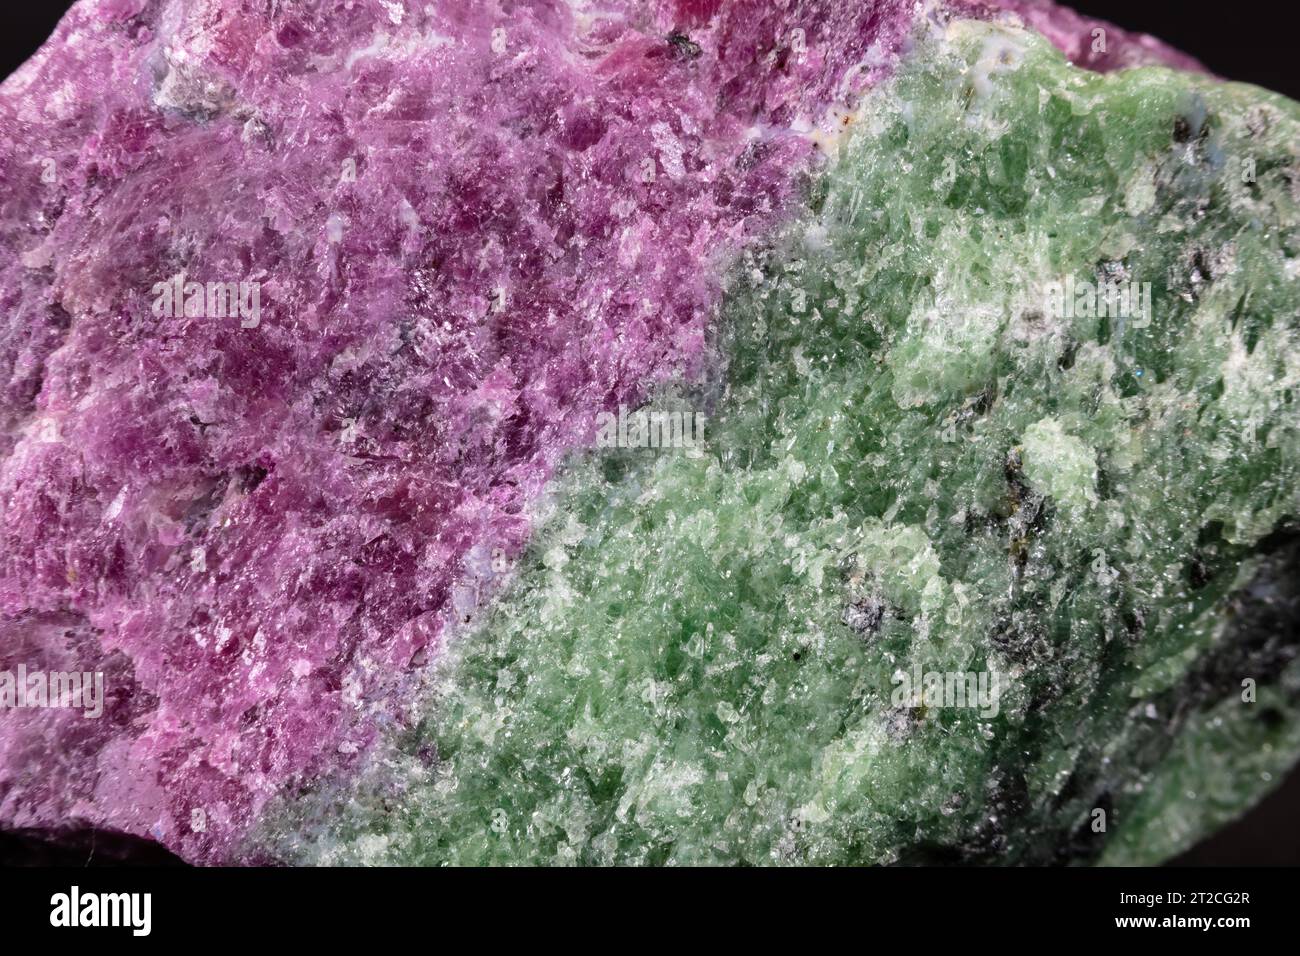 red crystal of natural origin. close up of crystals in ruby color on black  background Stock Photo